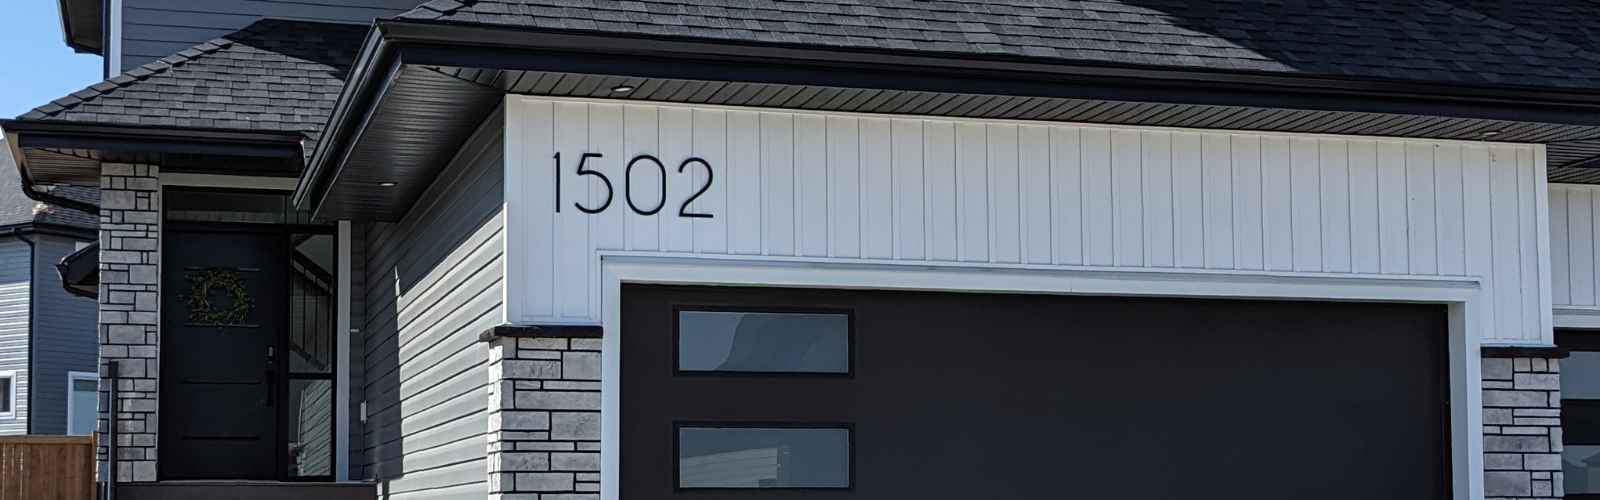 Modern house numbers and letters for the perfect finishing touch for a modern home or business exterior. 